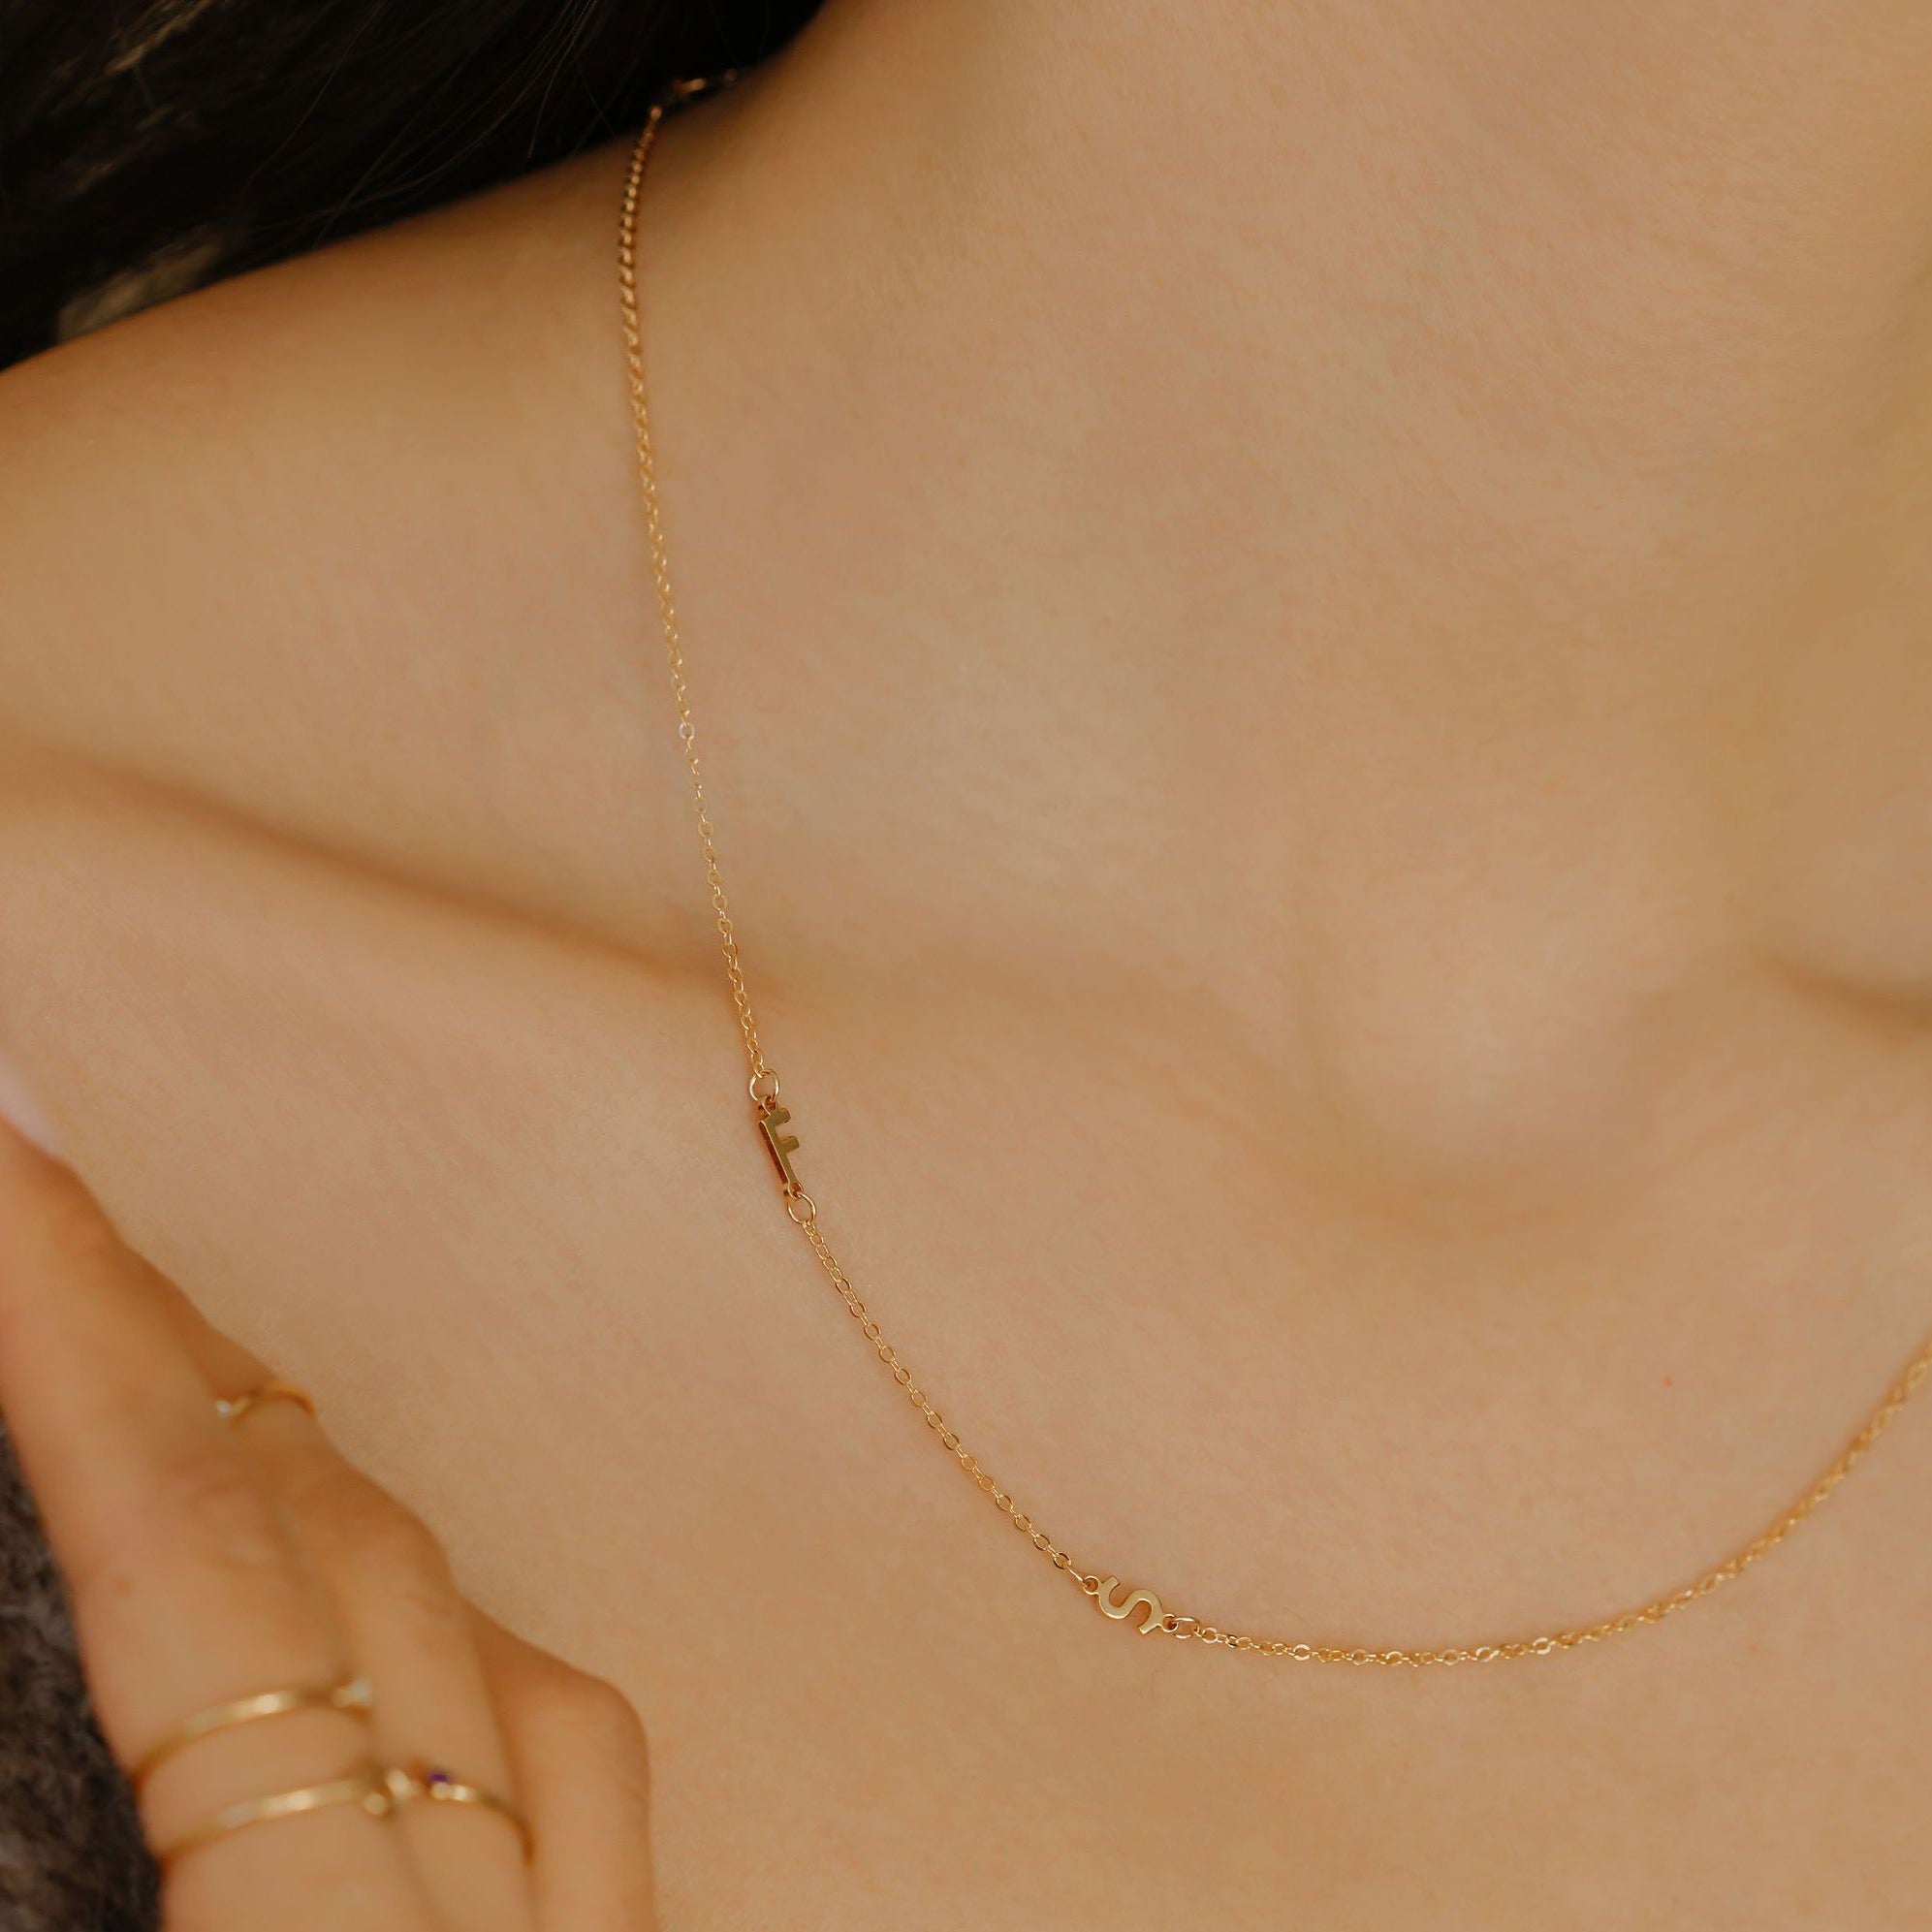 Dainty sideways initial necklace in Yellow Gold, Rose Gold or White Gold.